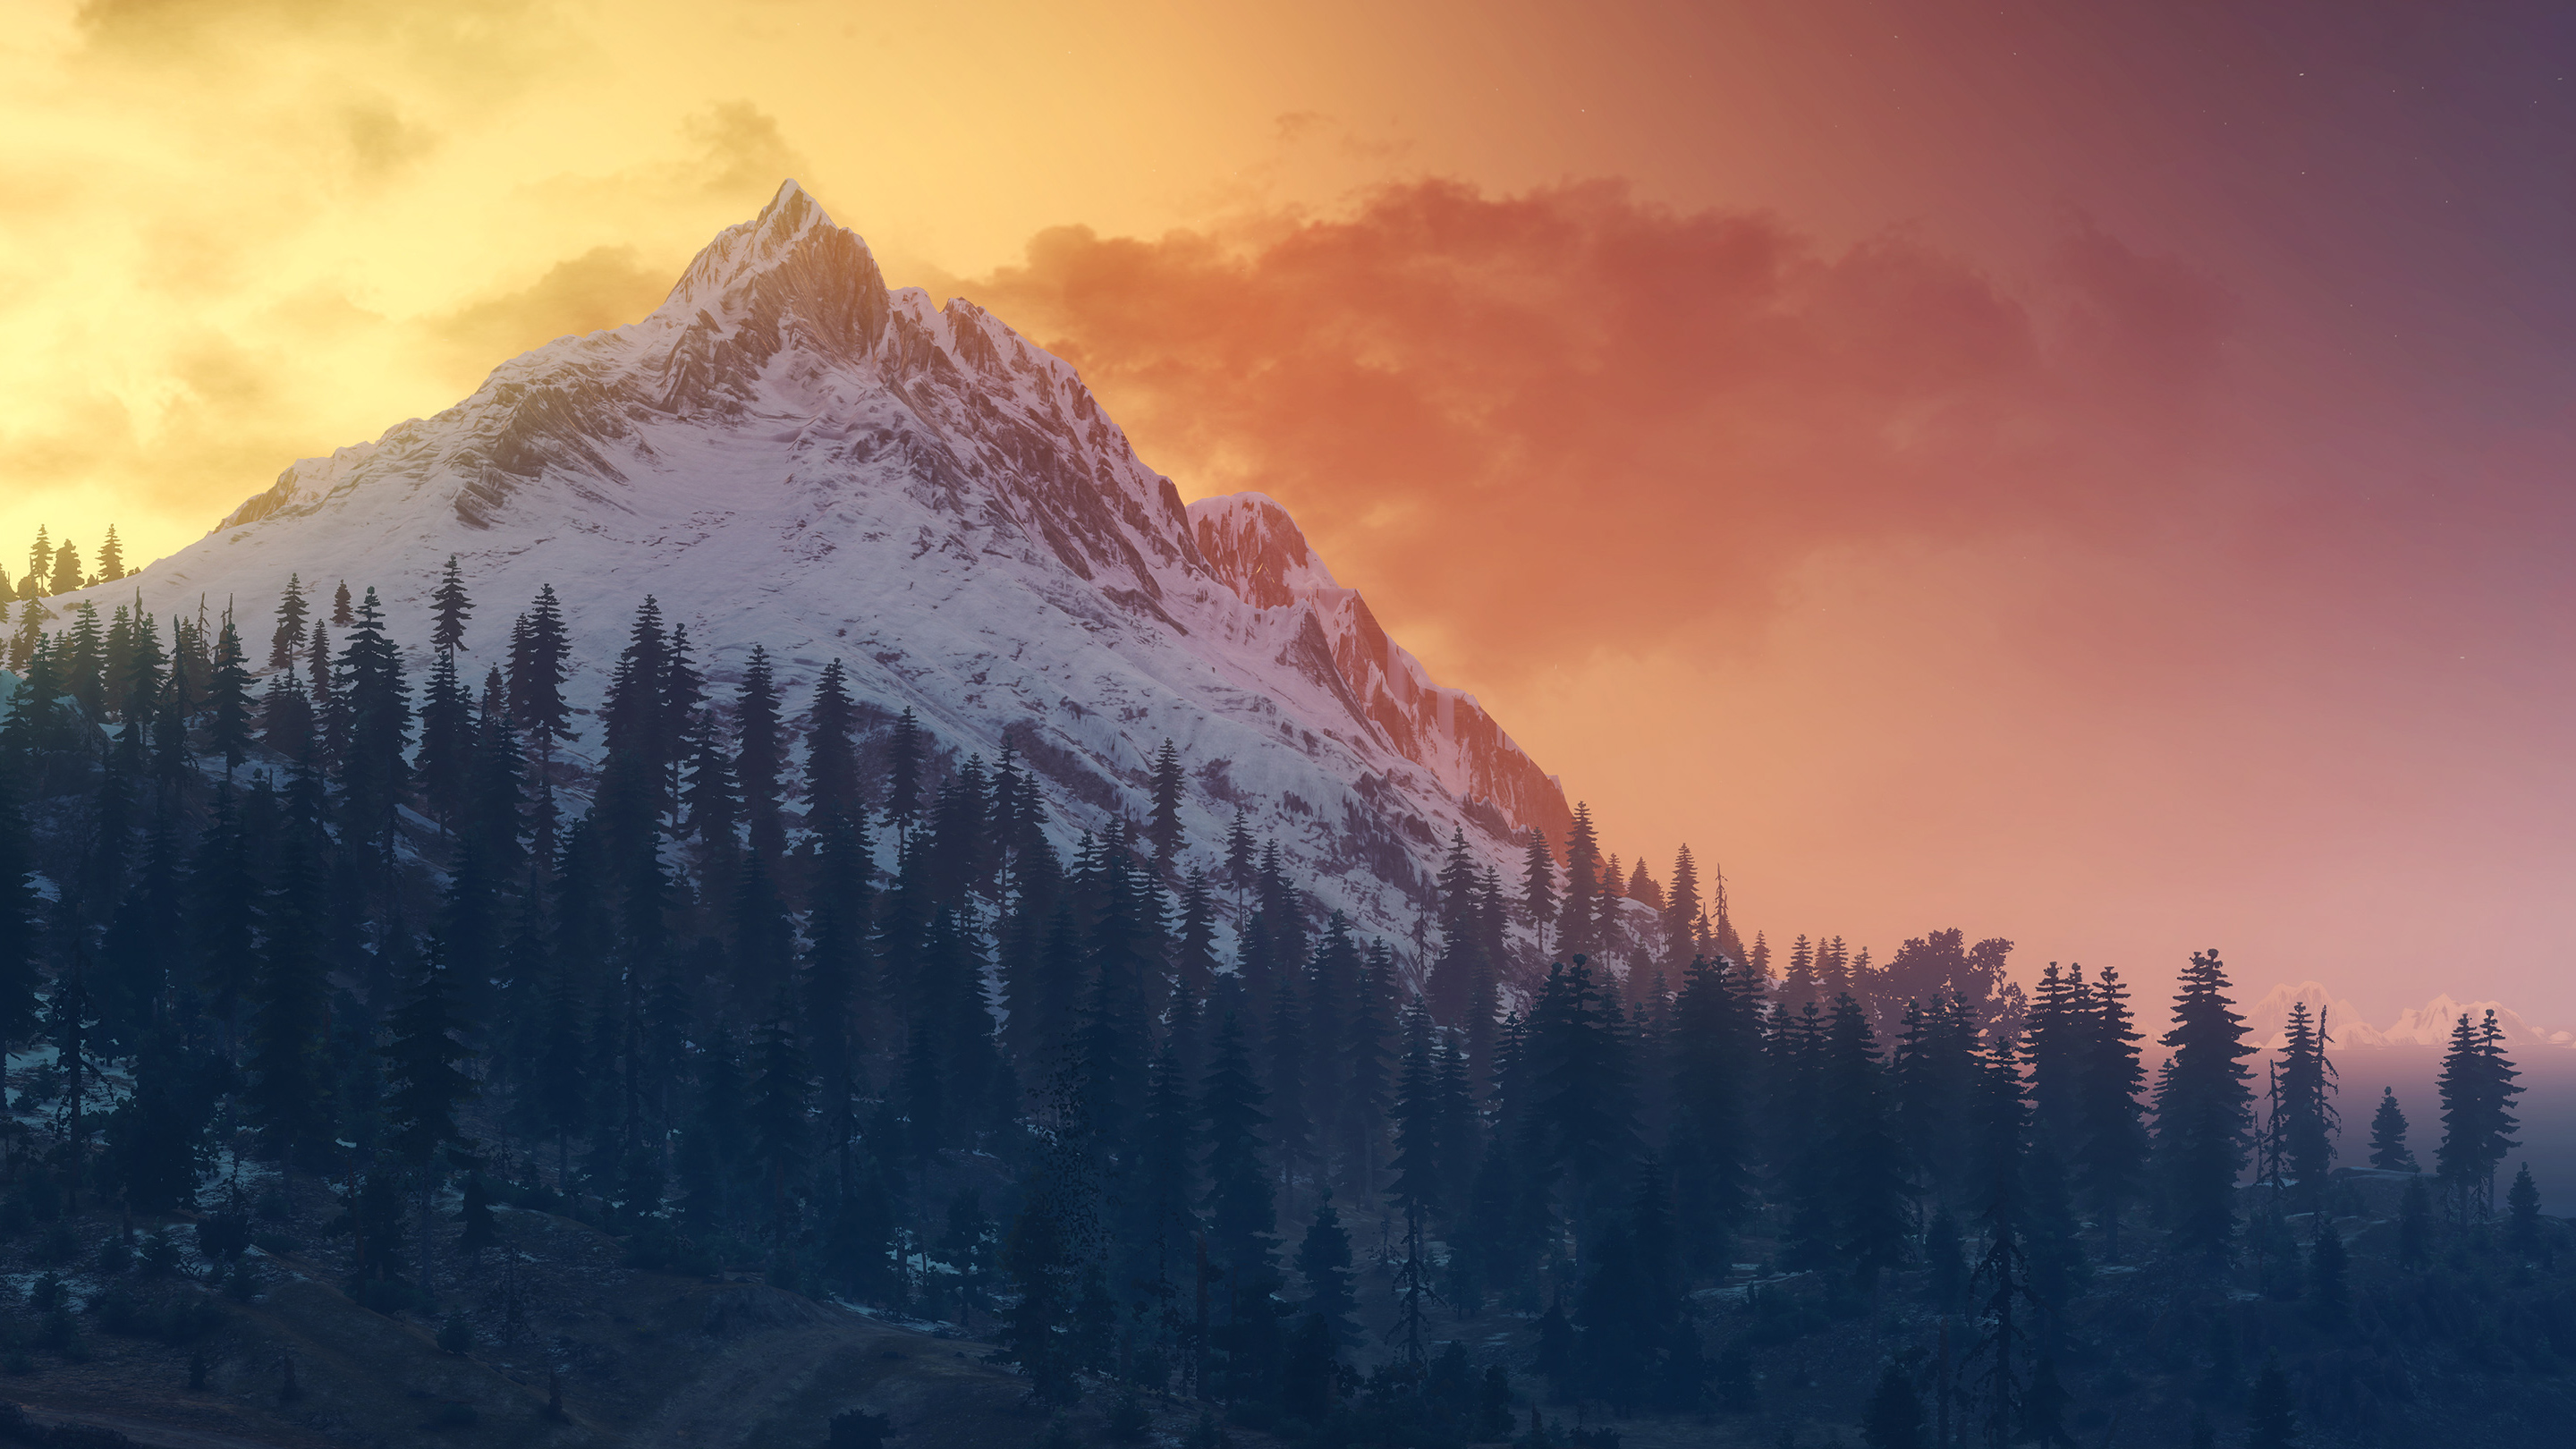 The Witcher 3 Wild Hunt Landscape Mountains639713889 - The Witcher 3 Wild Hunt Landscape Mountains - Witcher, Wild, The, Sail, Mountains, Landscape, Hunt